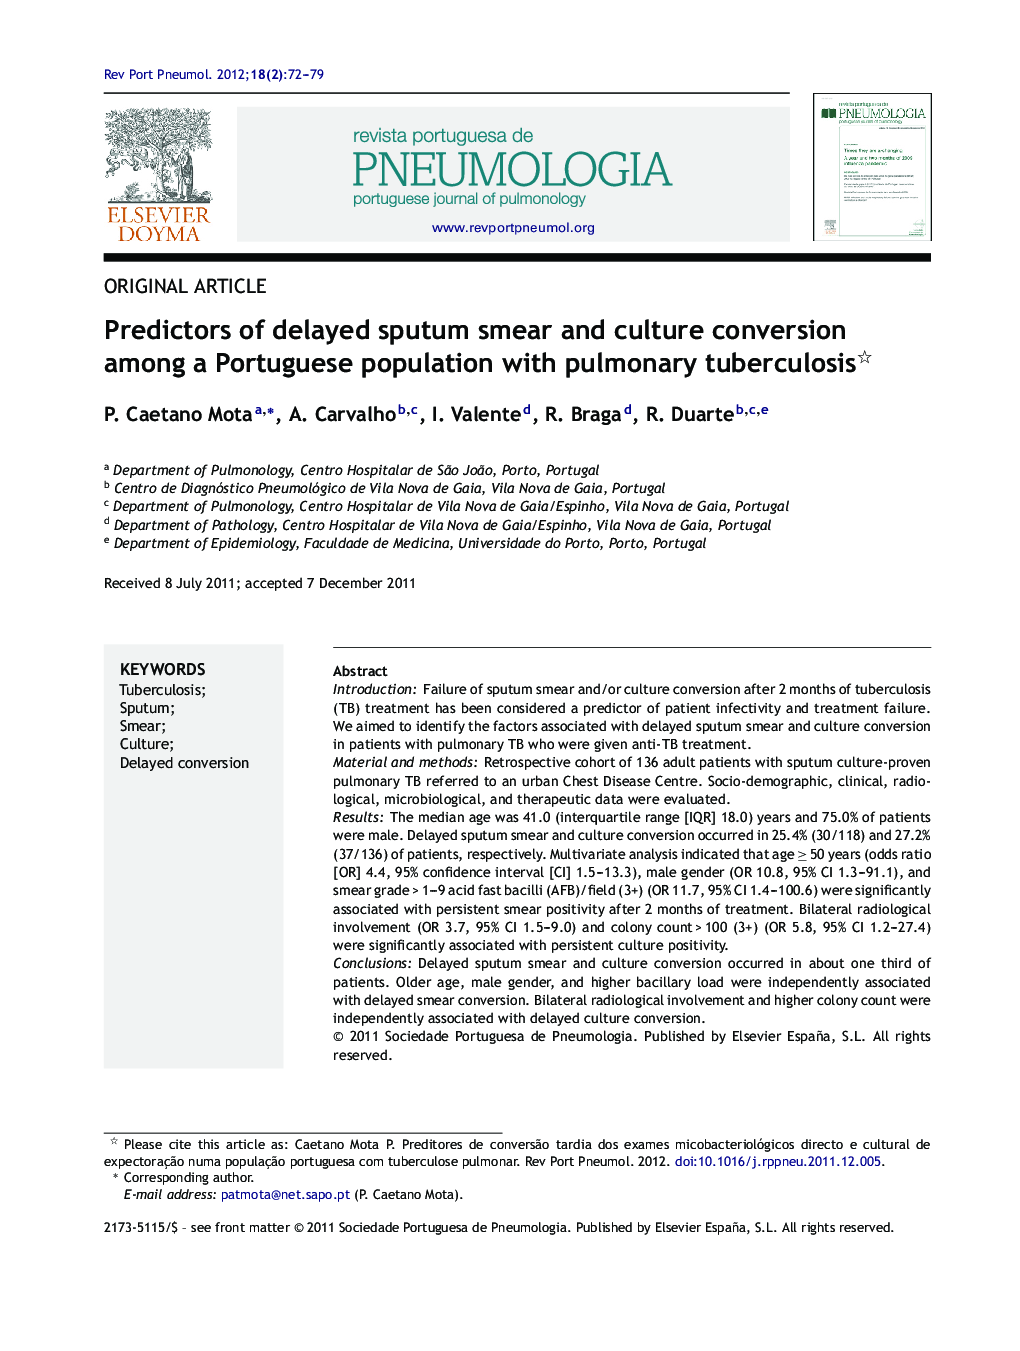 Predictors of delayed sputum smear and culture conversion among a Portuguese population with pulmonary tuberculosis 